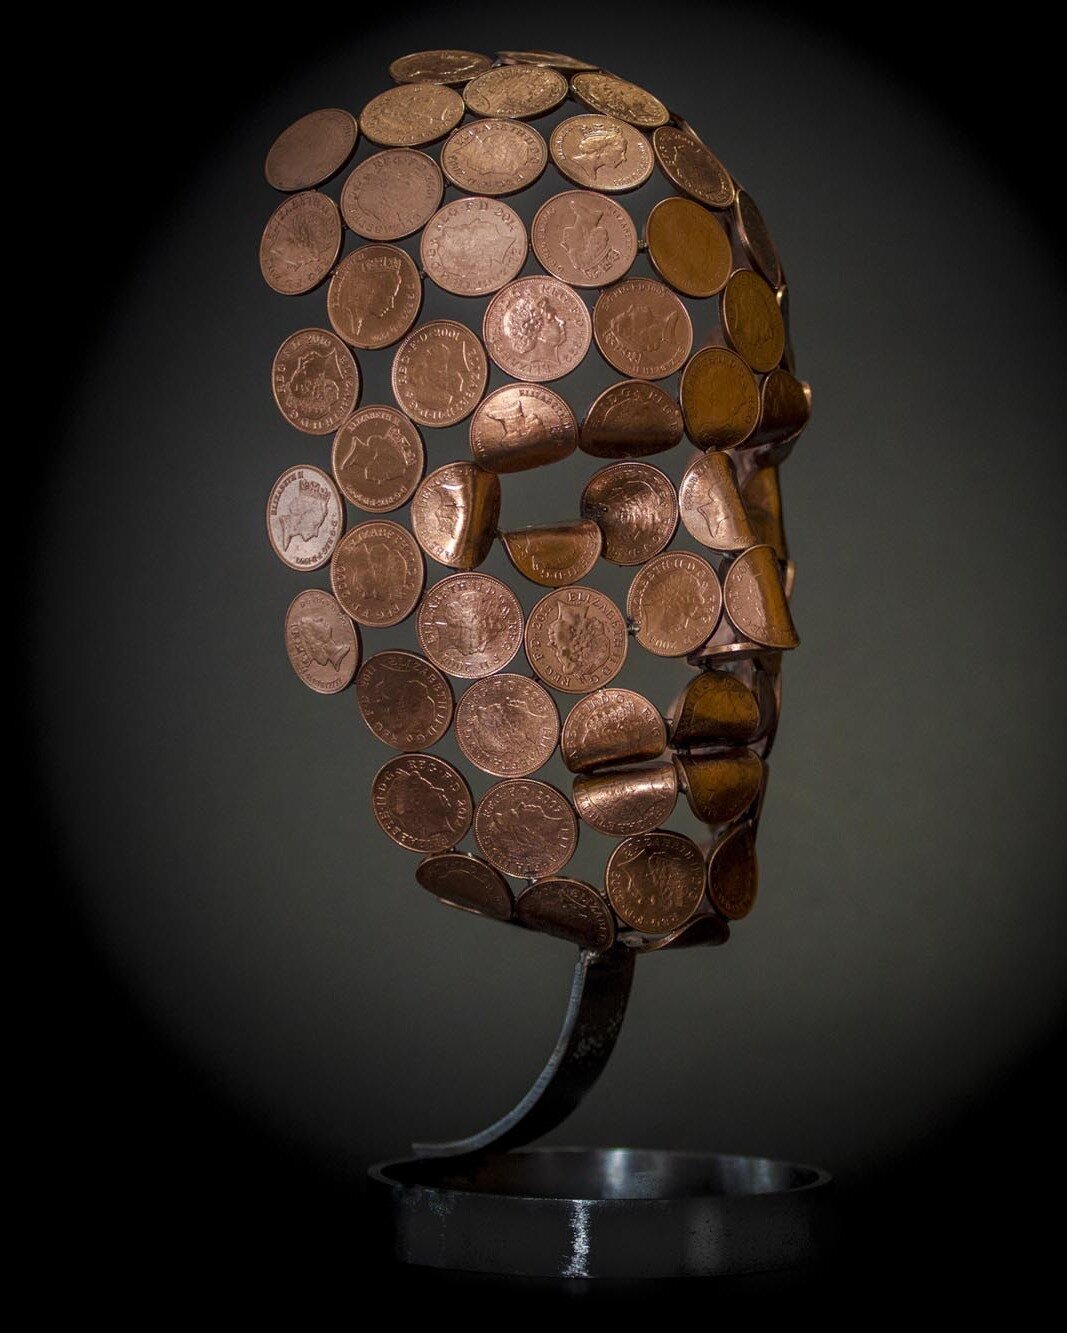 &quot;Small Head&quot; - A unique creation crafted from welded 2p coins, intricately folded to enhance its defining features. Perched atop a sleek stainless steel base, this piece embodies artistry and innovation.

#CoinArt #Sculpture #CreativeDesign